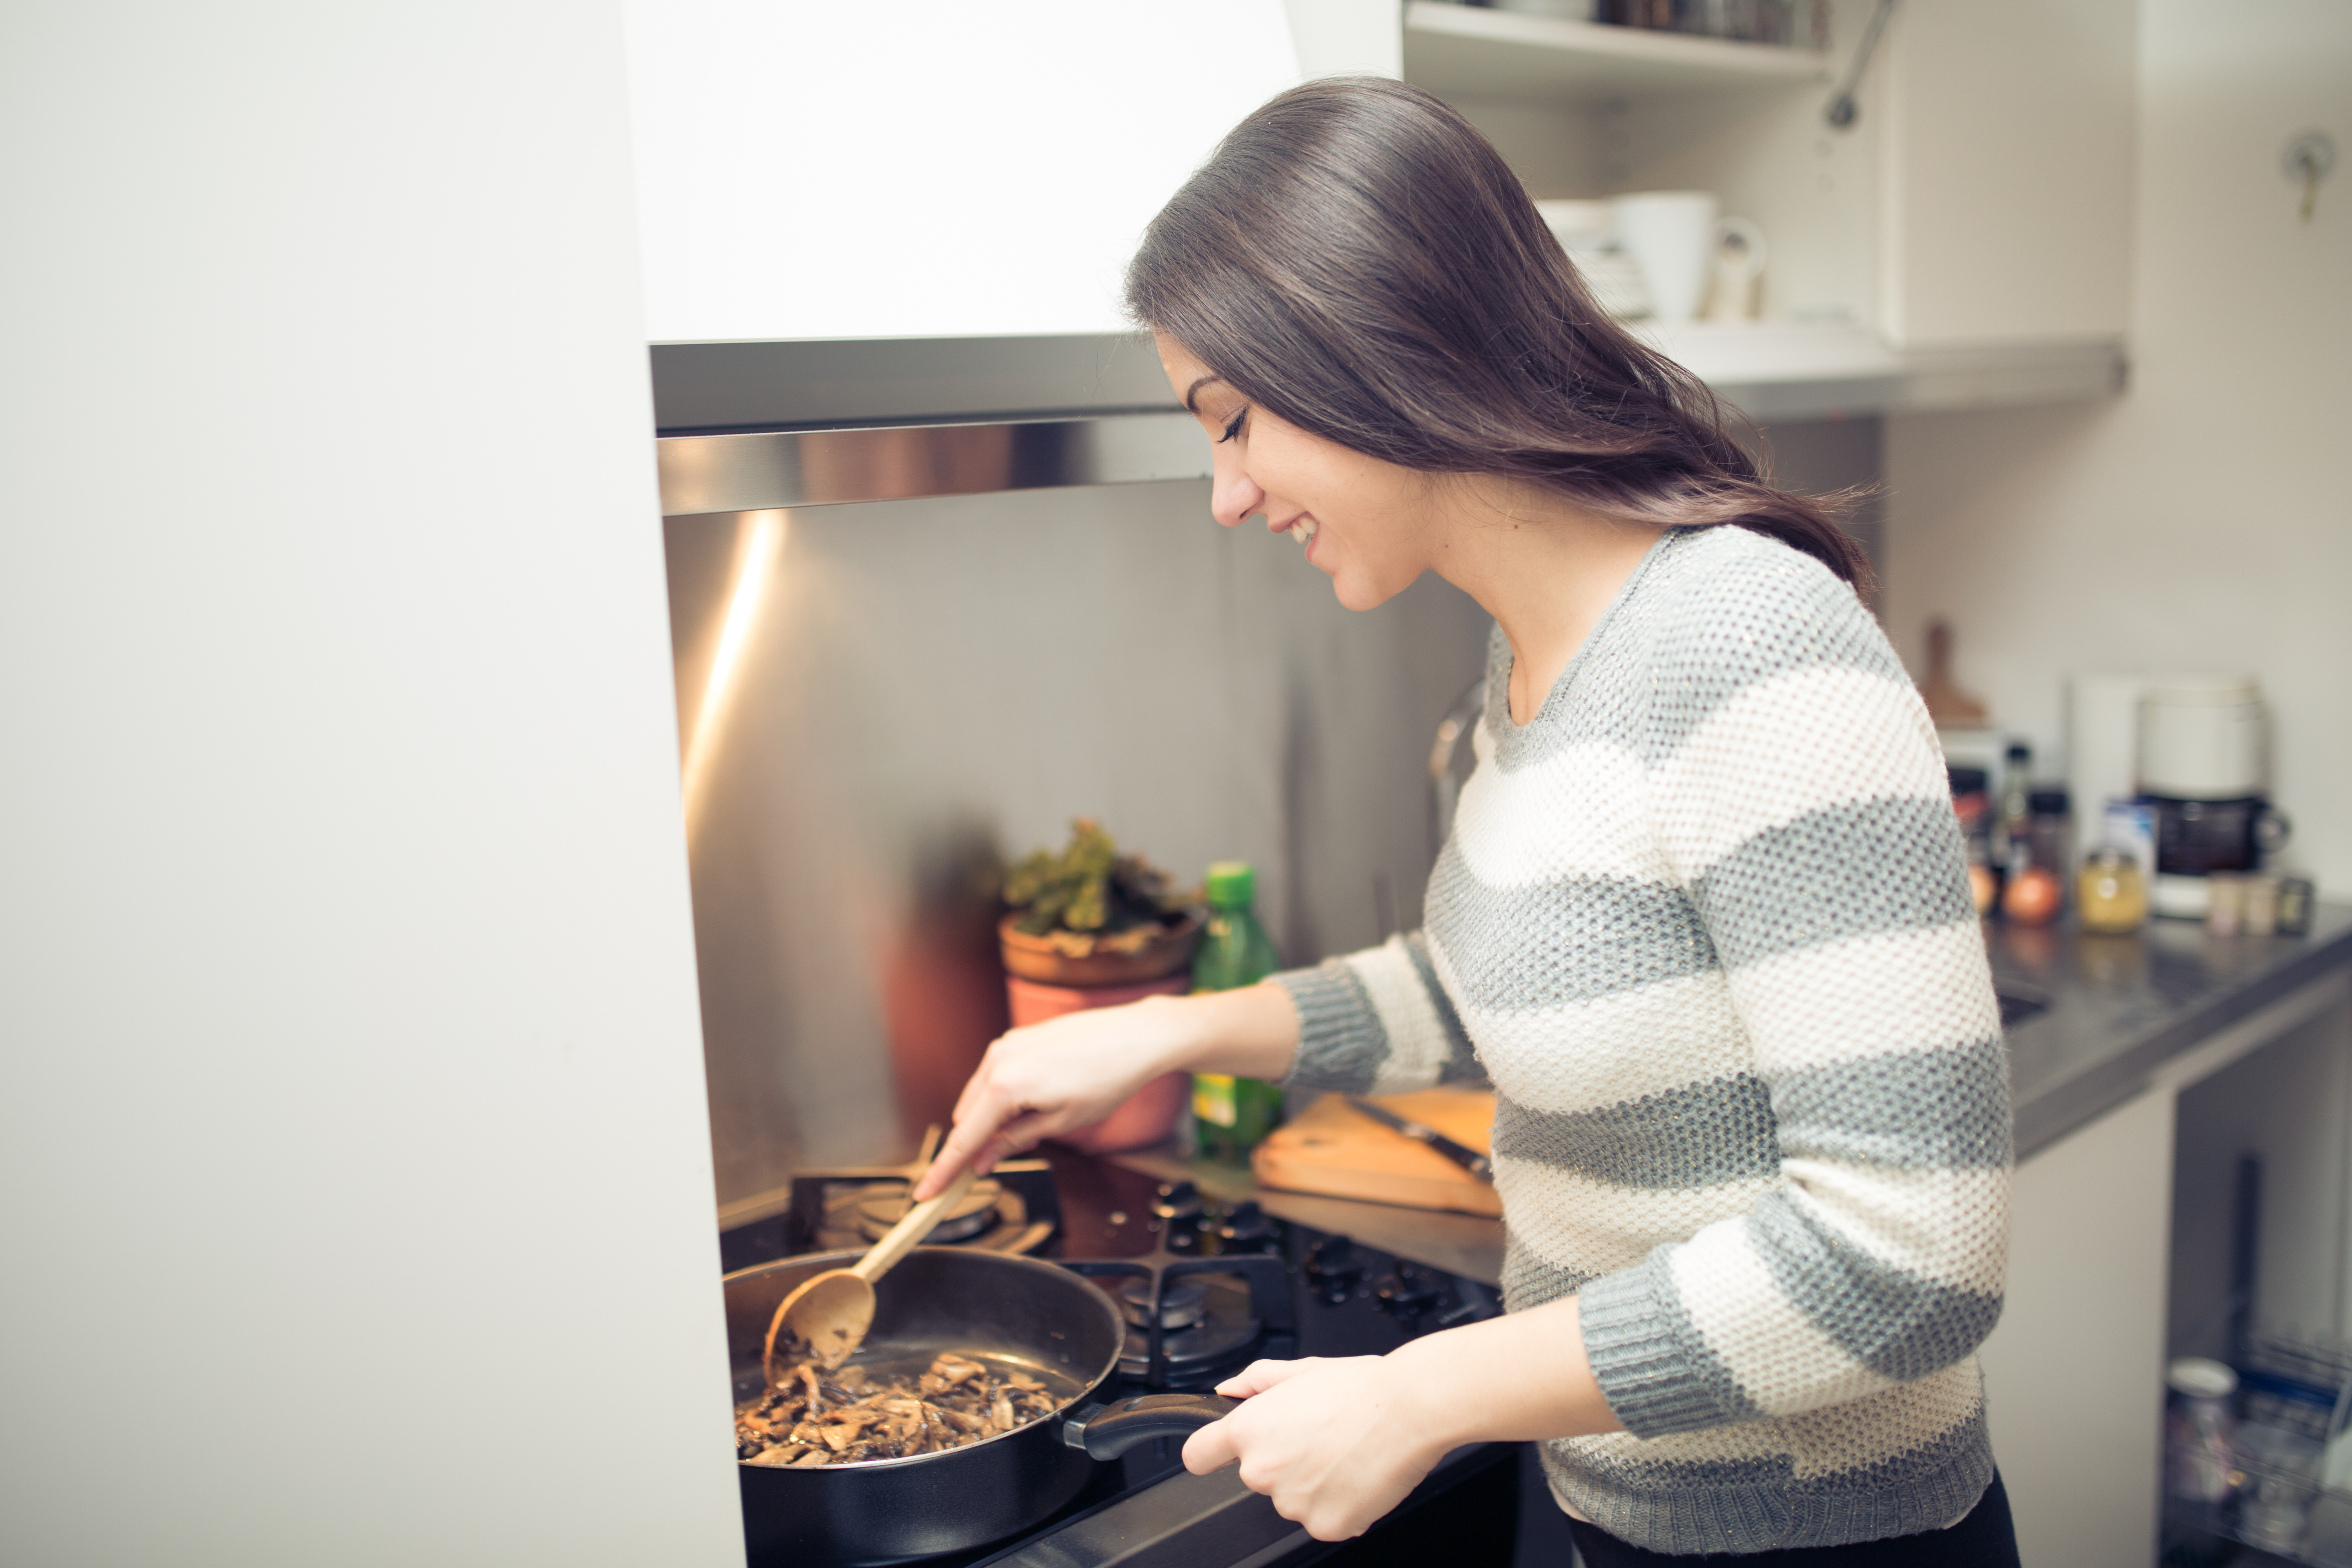 Young woman cooking healthy diet food in the home kitchen. | Source: Shutterstock